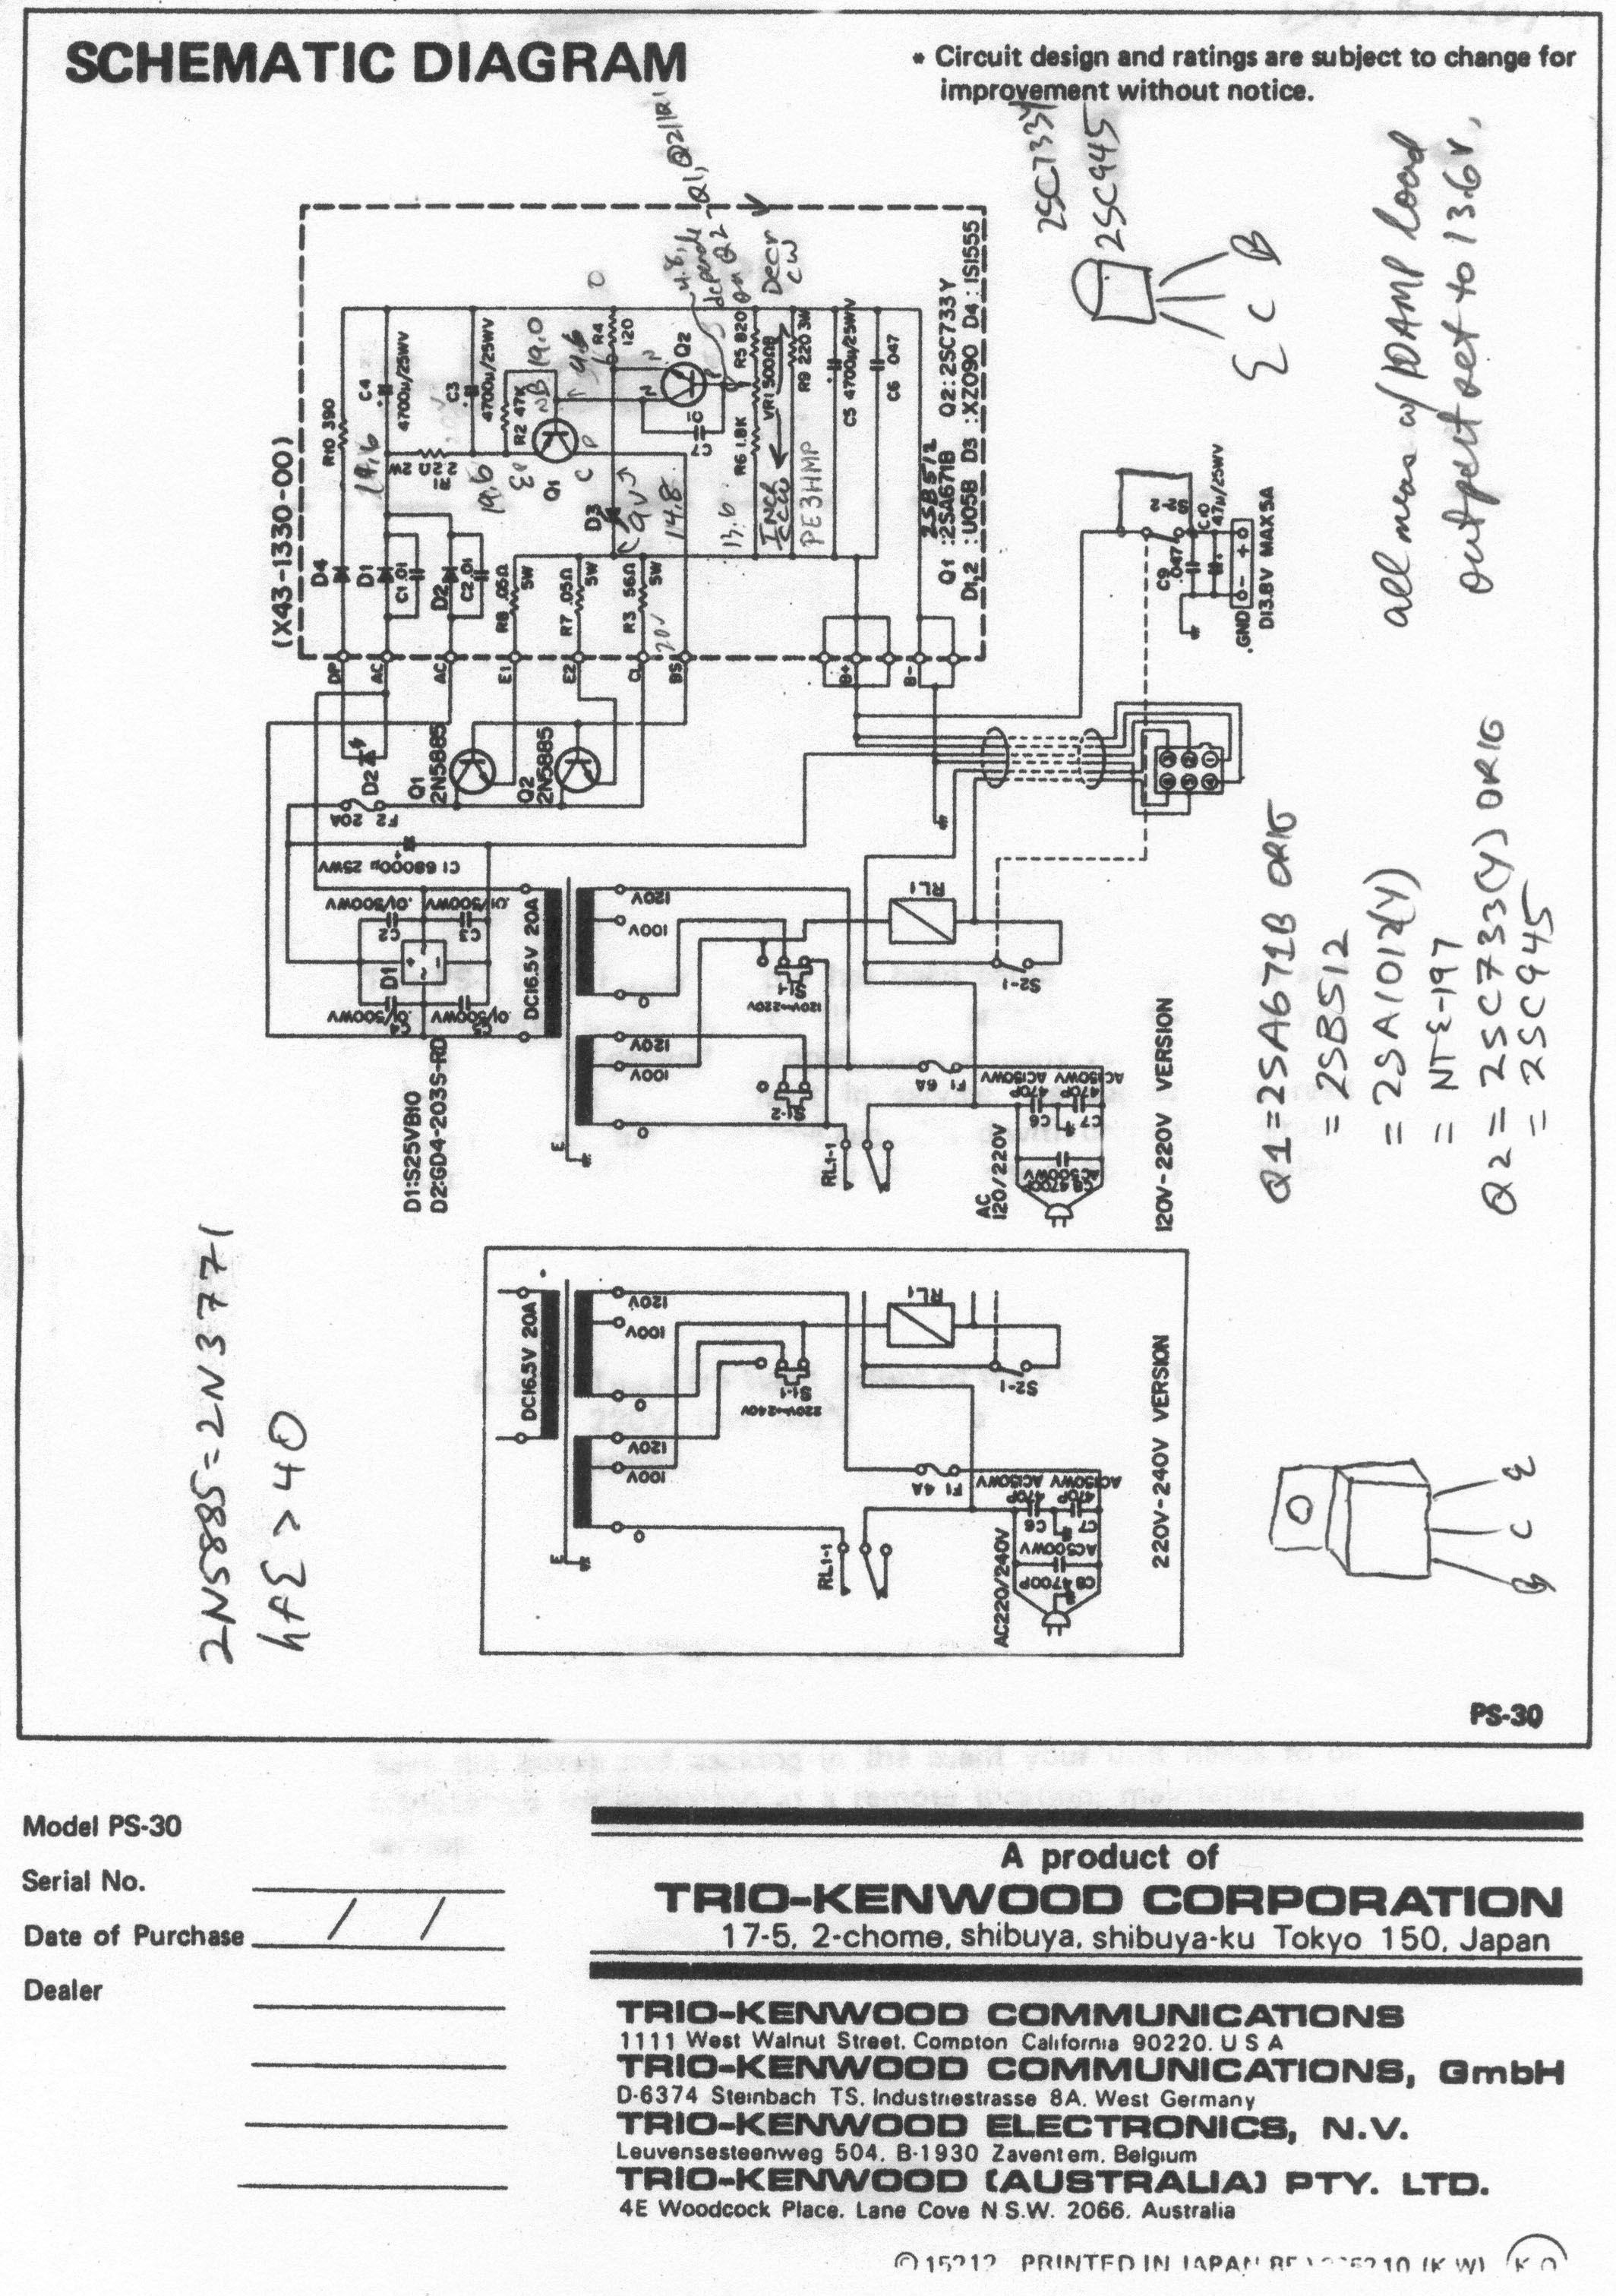 Kenwood PS-30 Schematic Diagram for PS-30 Trio - Kenwood